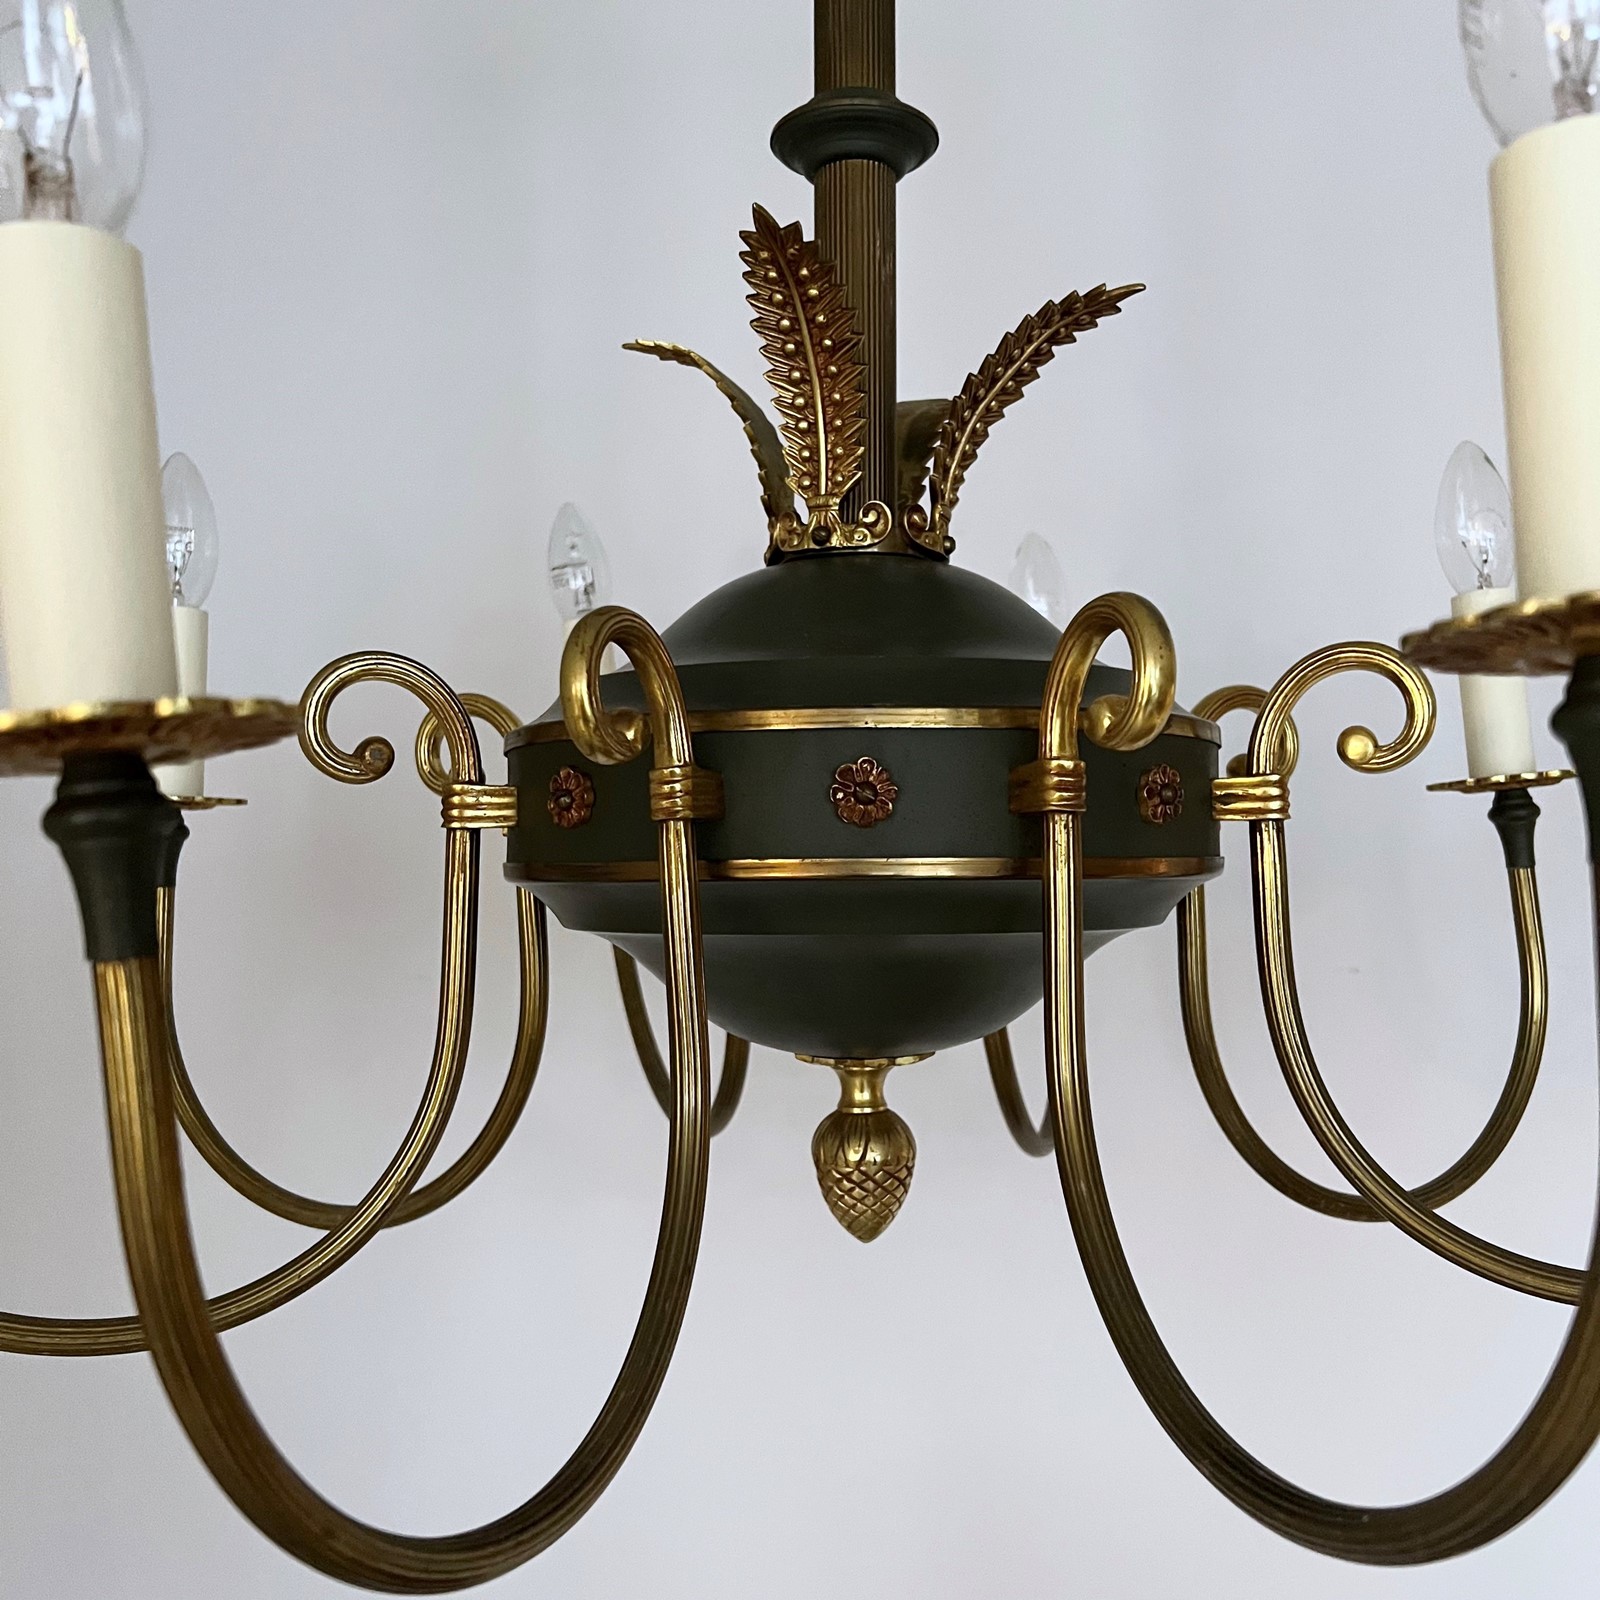 Small Flemish Brass Chandelier - Agapanthus Interiors